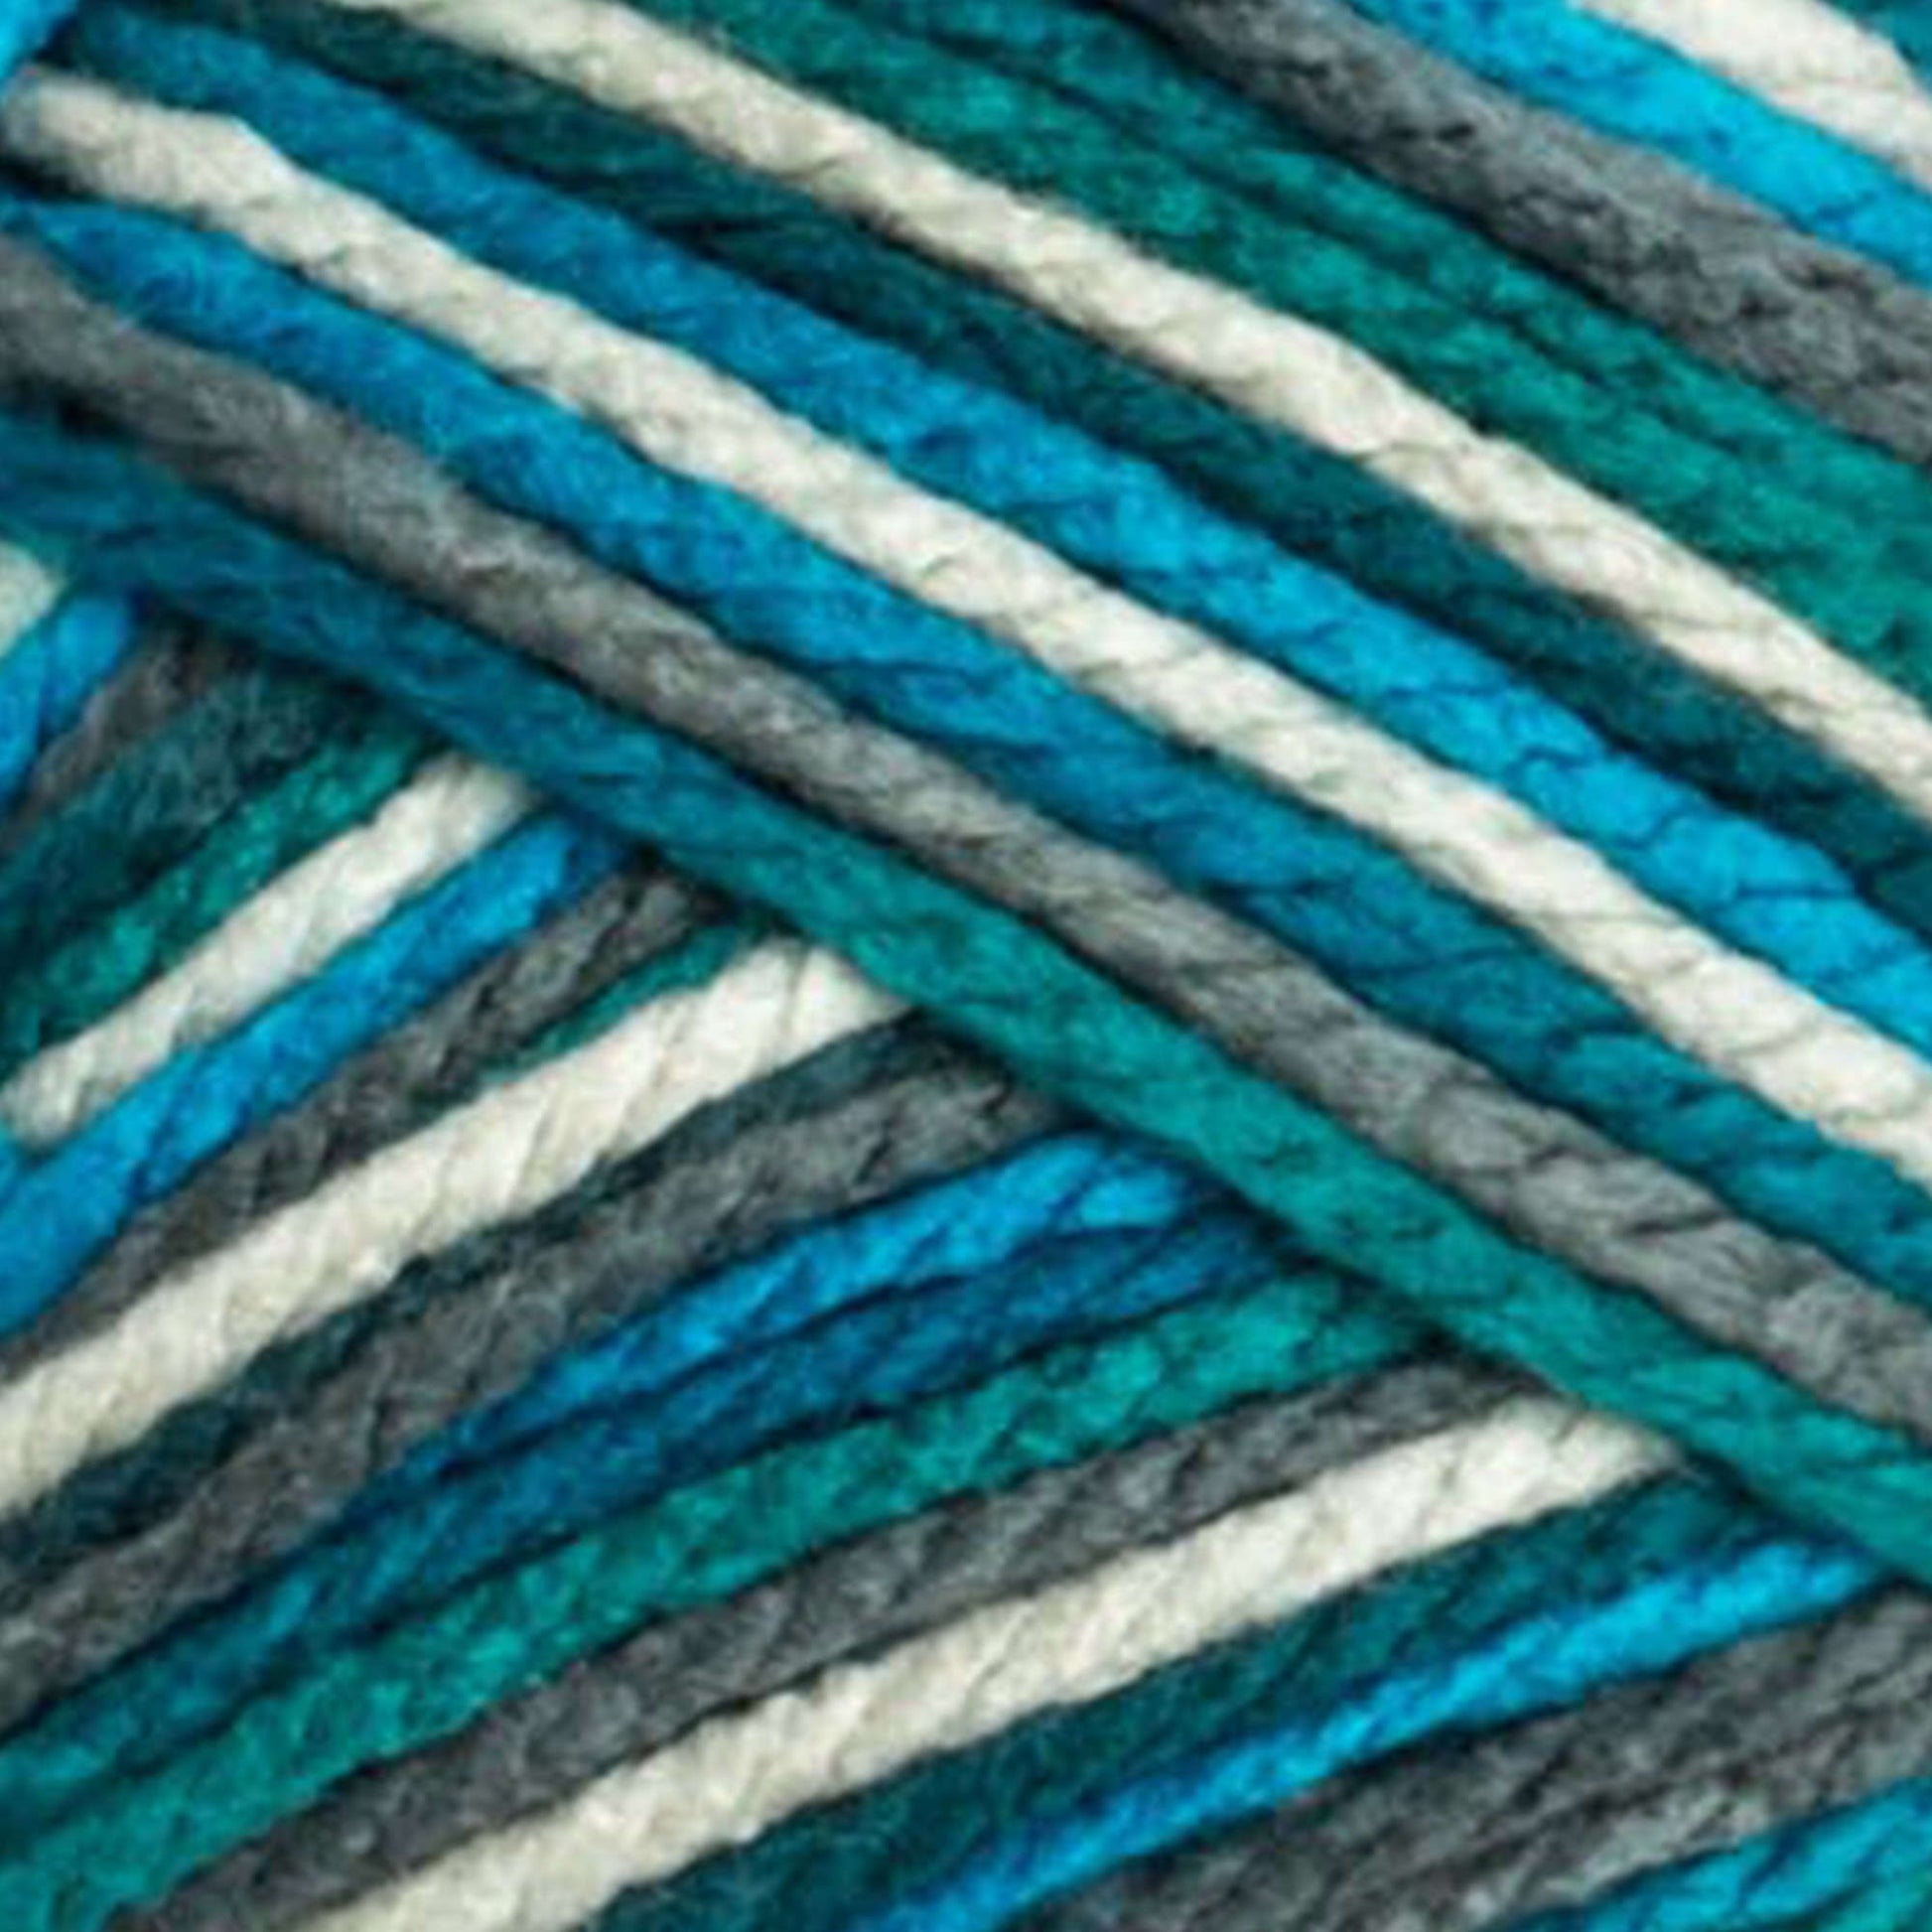 Bernat Softee Chunky Ombres Yarn (300g/10.5oz) - Clearance Shades Deep Waters Ombre